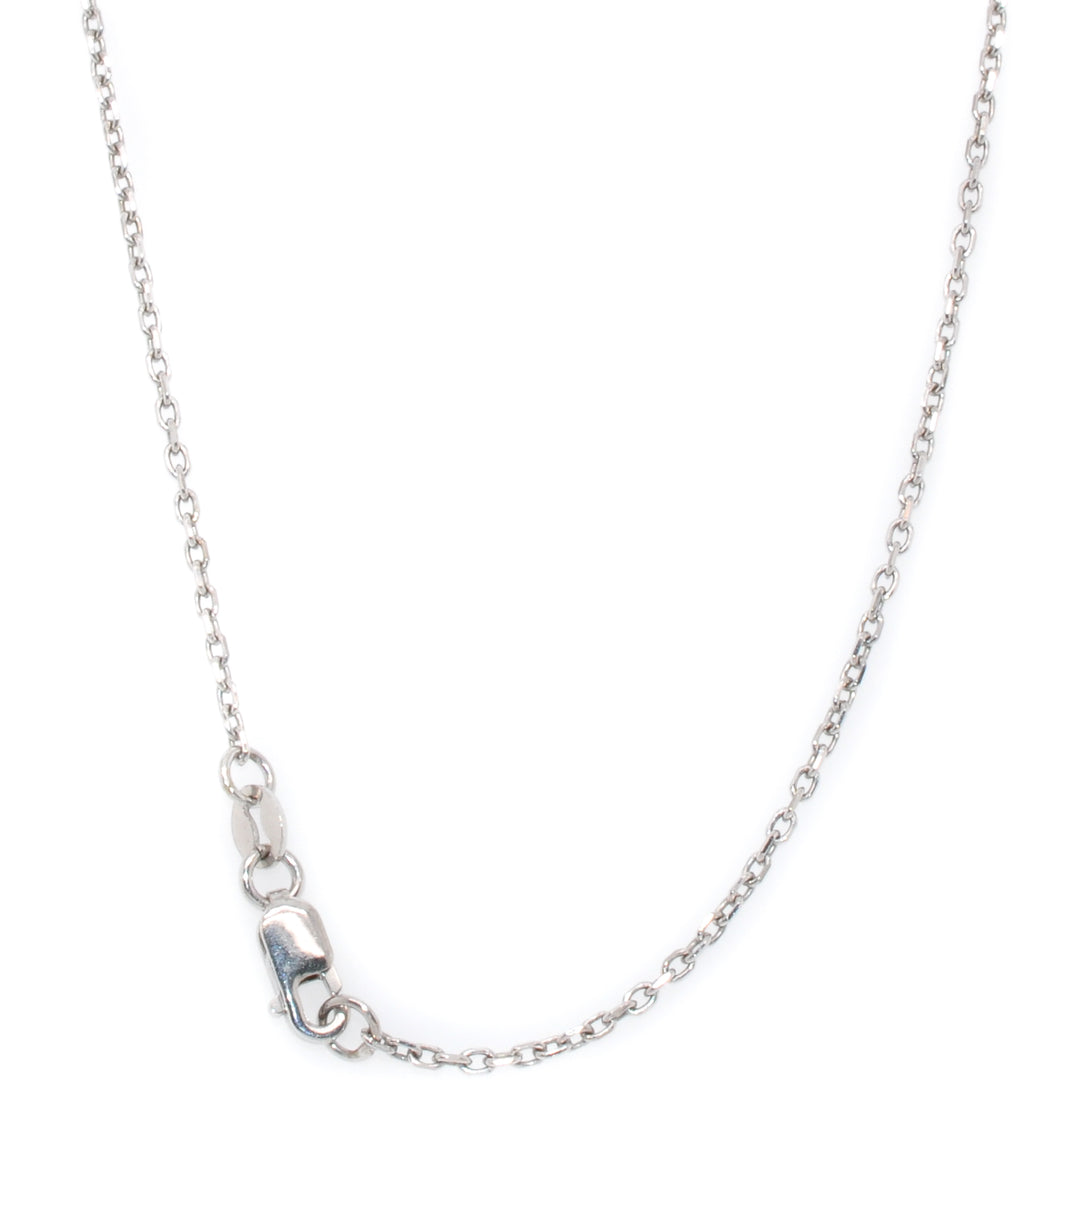 10KT White Gold 18" 1.62MM Rolo Chain.

Approx Weight: 3.3g